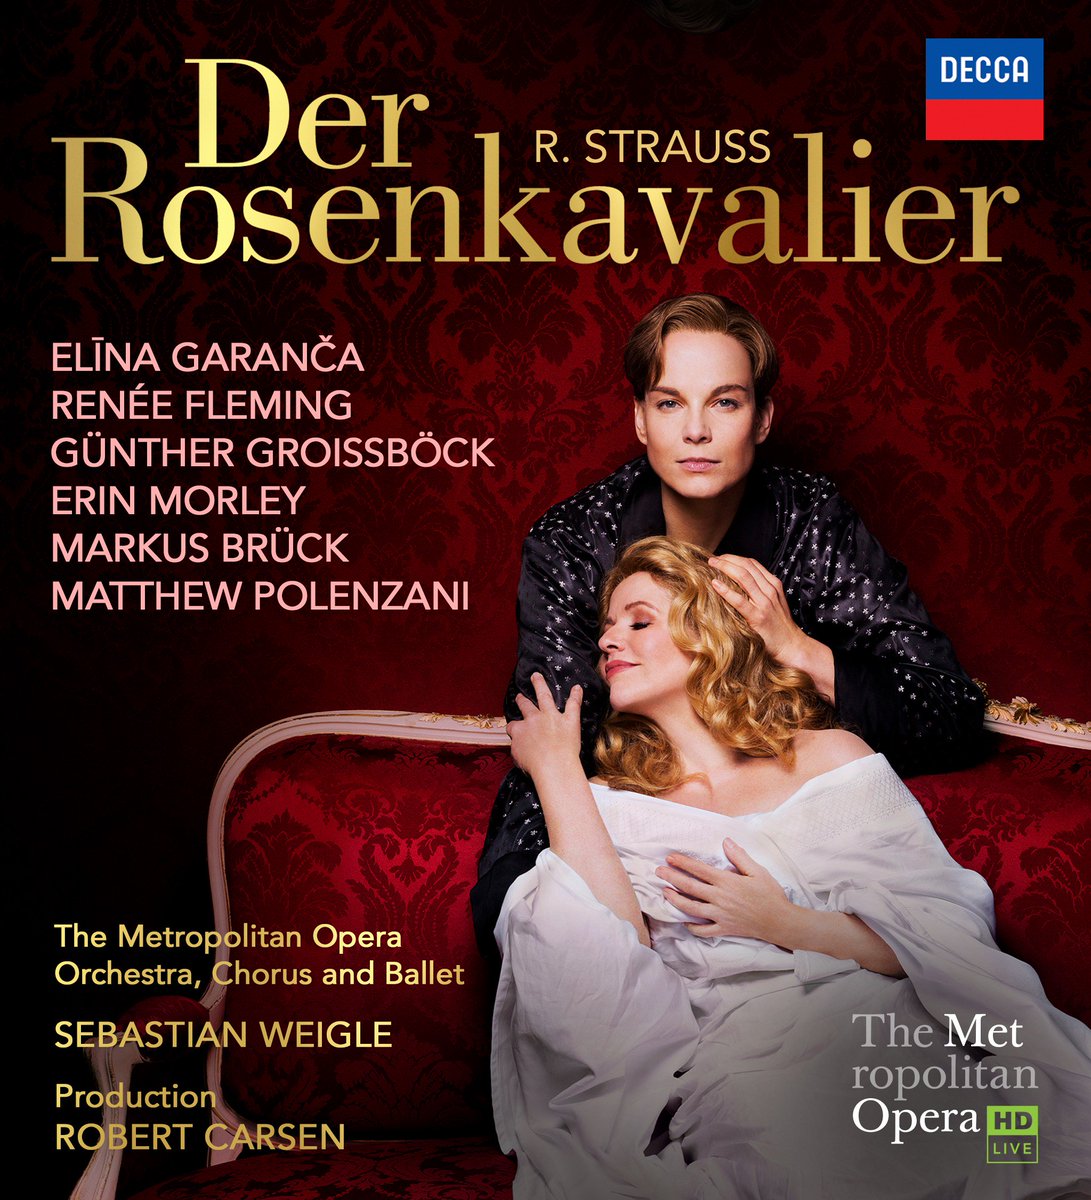 🎉 Bravo! The 2017 performance of #DerRosenkavalier starring @ReneeFleming and @ElinaGaranca has been nominated for Best Opera Recording at the #Grammys!